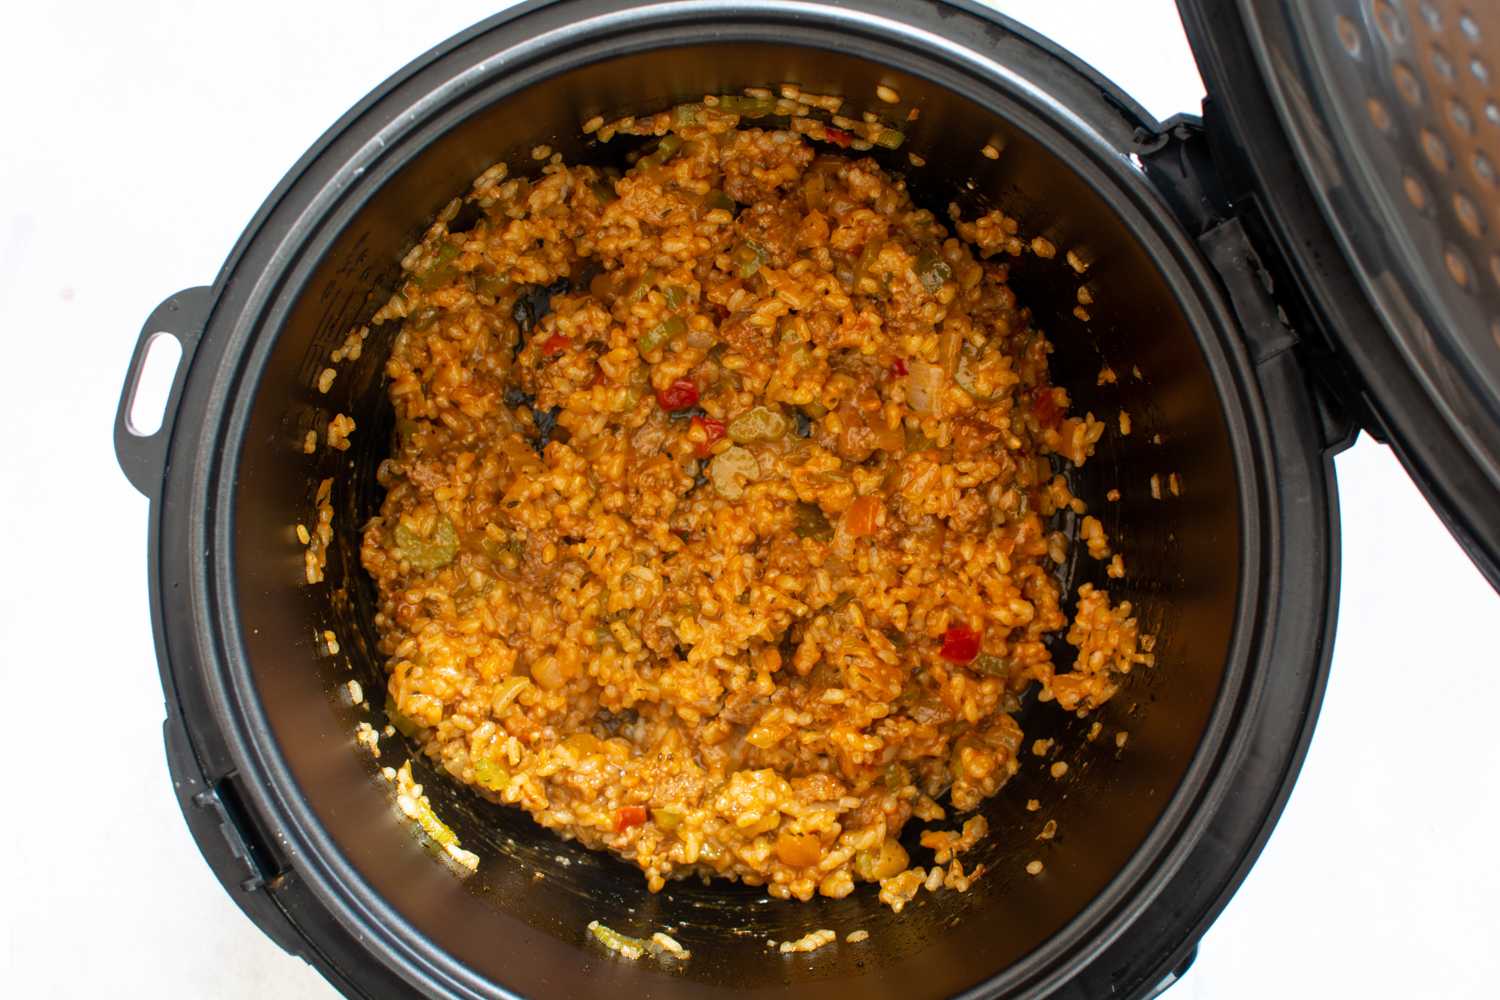 use long-grain white rice, ground beef, and cajun seasoning for a dirty rice Instant Pot cajun dish